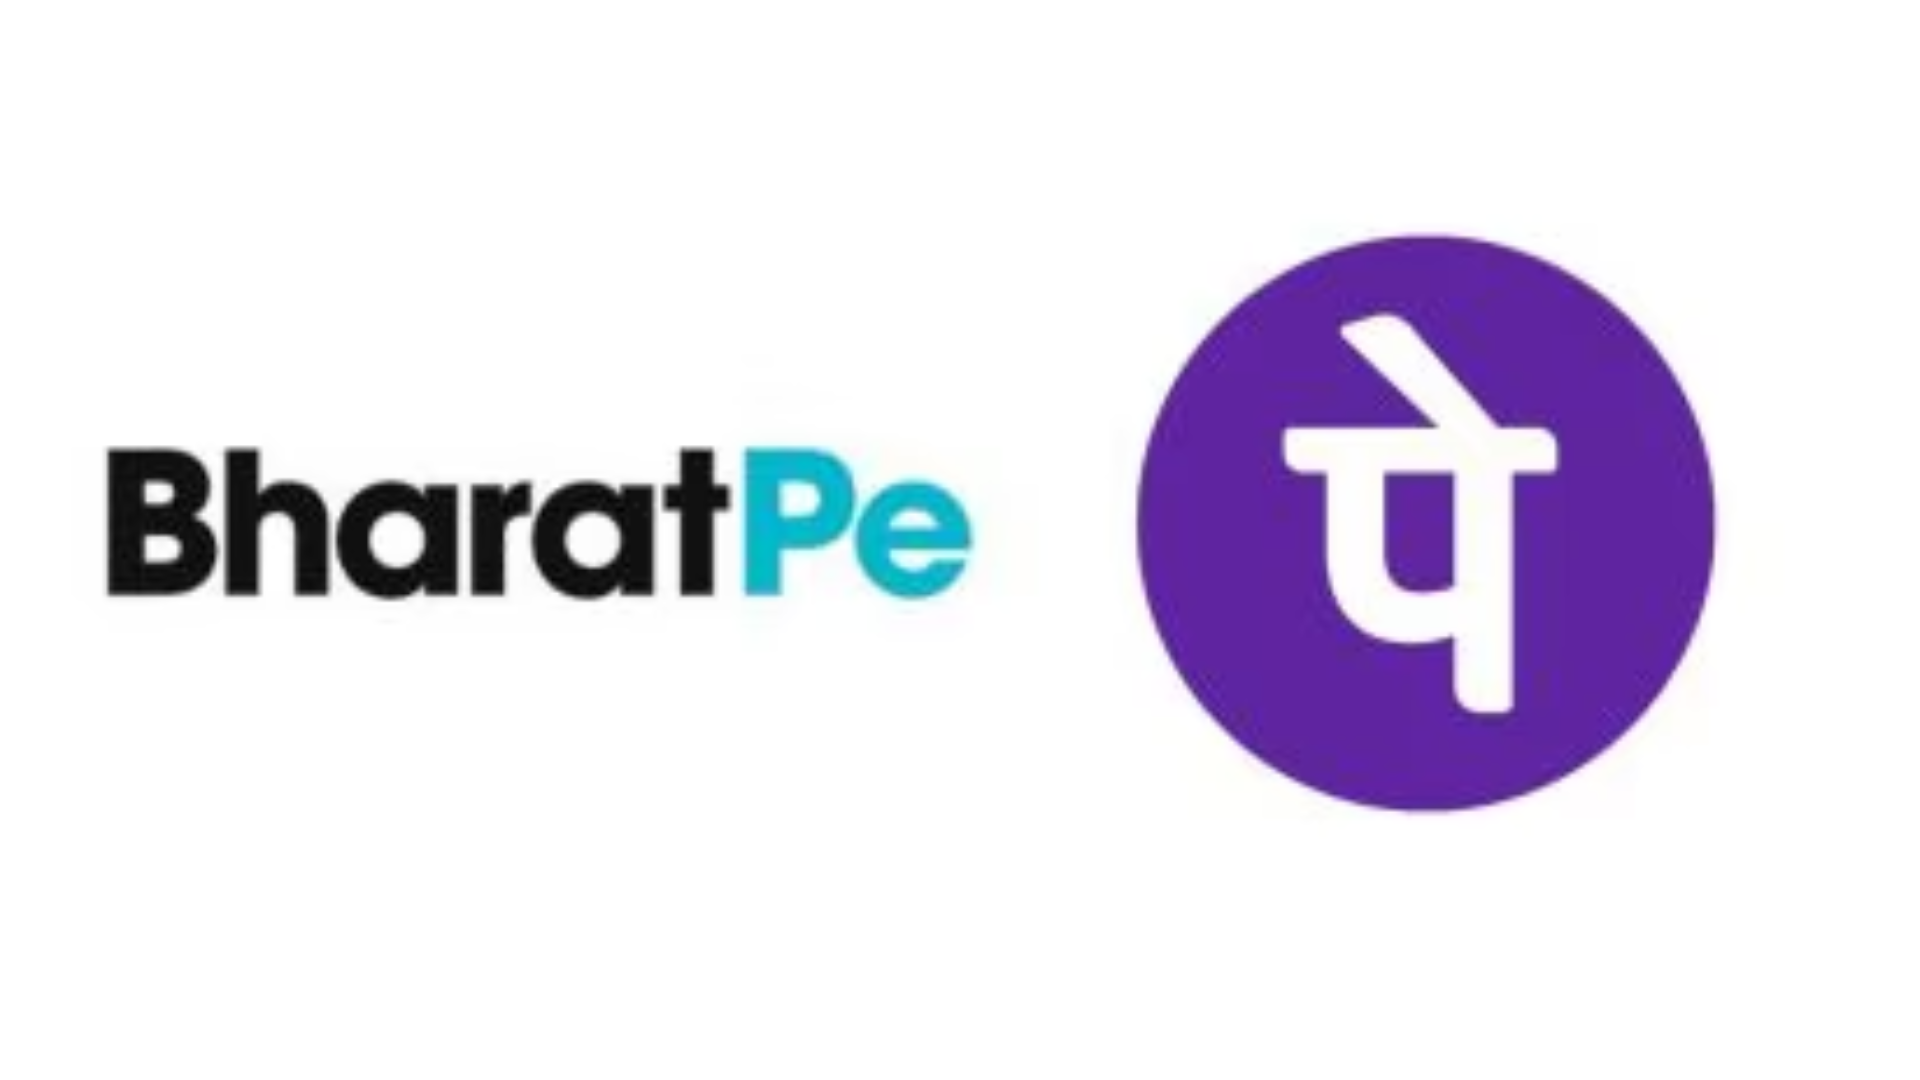 BharatPe and PhonePe Settle Long-Standing 'Pe' Trademark Dispute